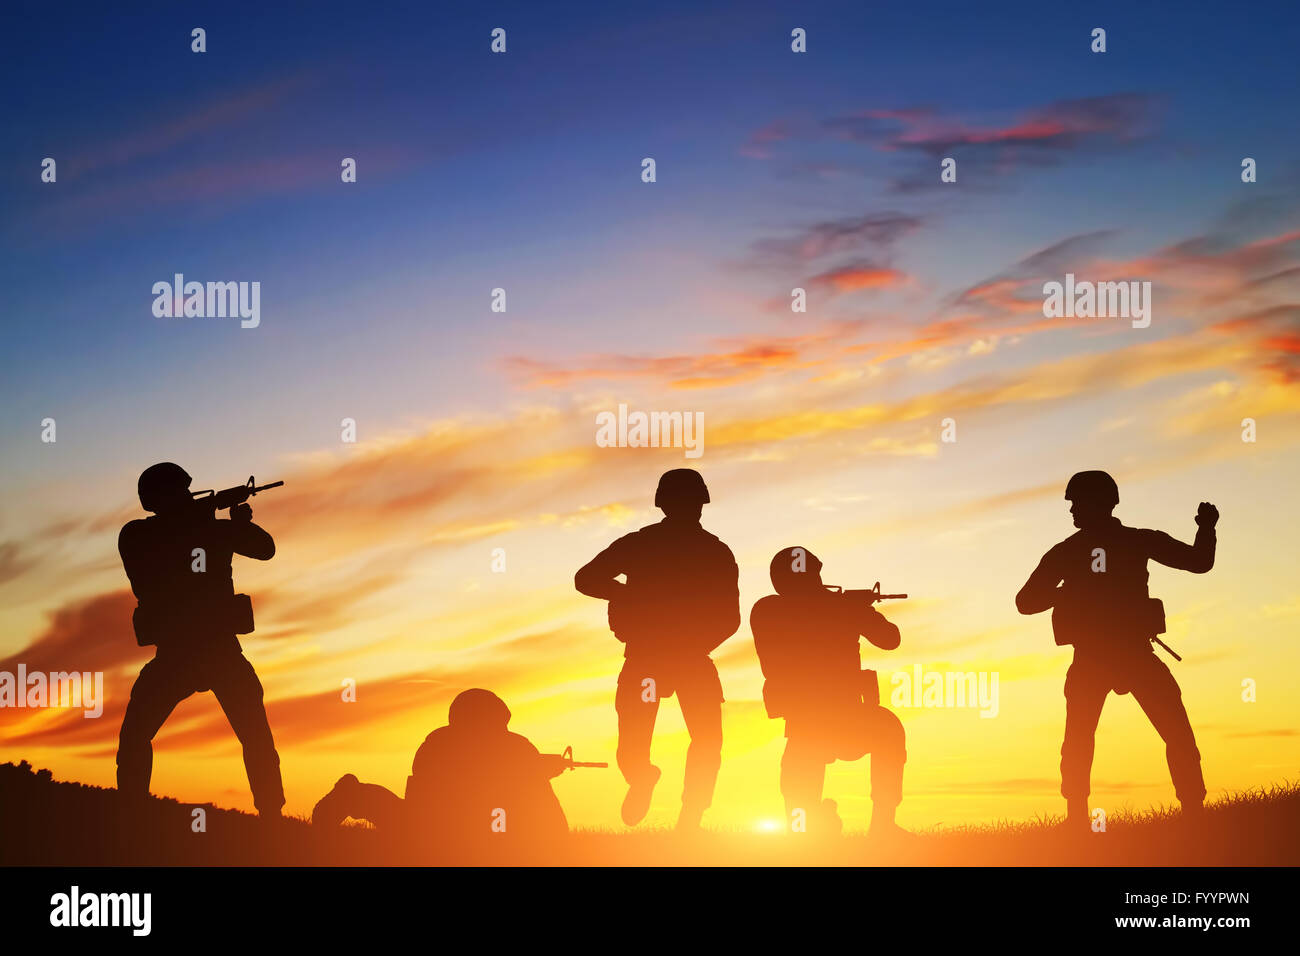 Soldiers in assault. War, army, military. Stock Photo